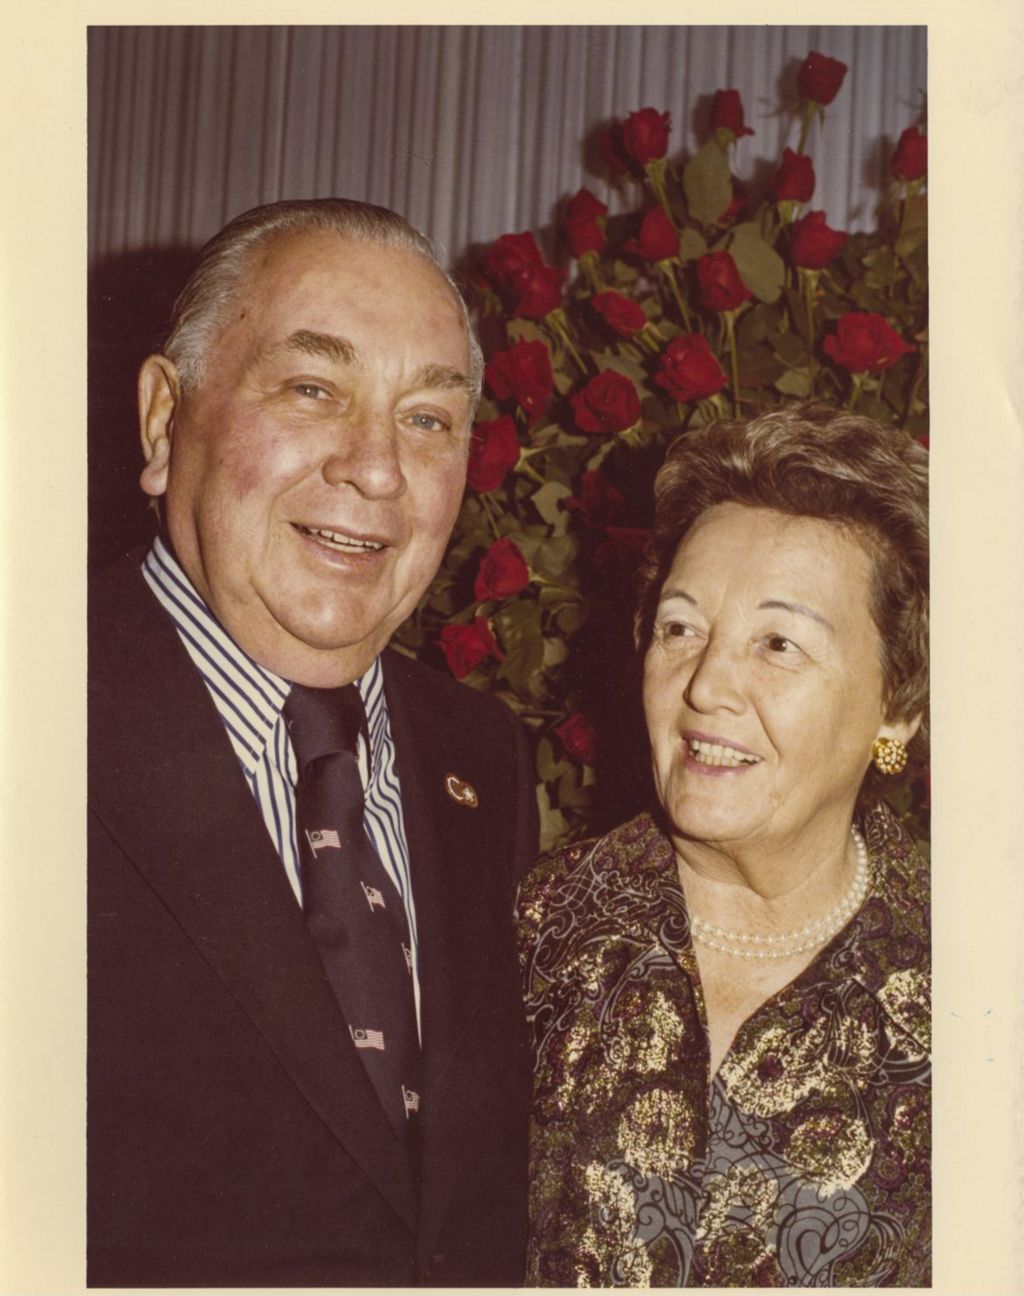 Miniature of Richard J. and Eleanor Daley In front of a bouquet of red roses